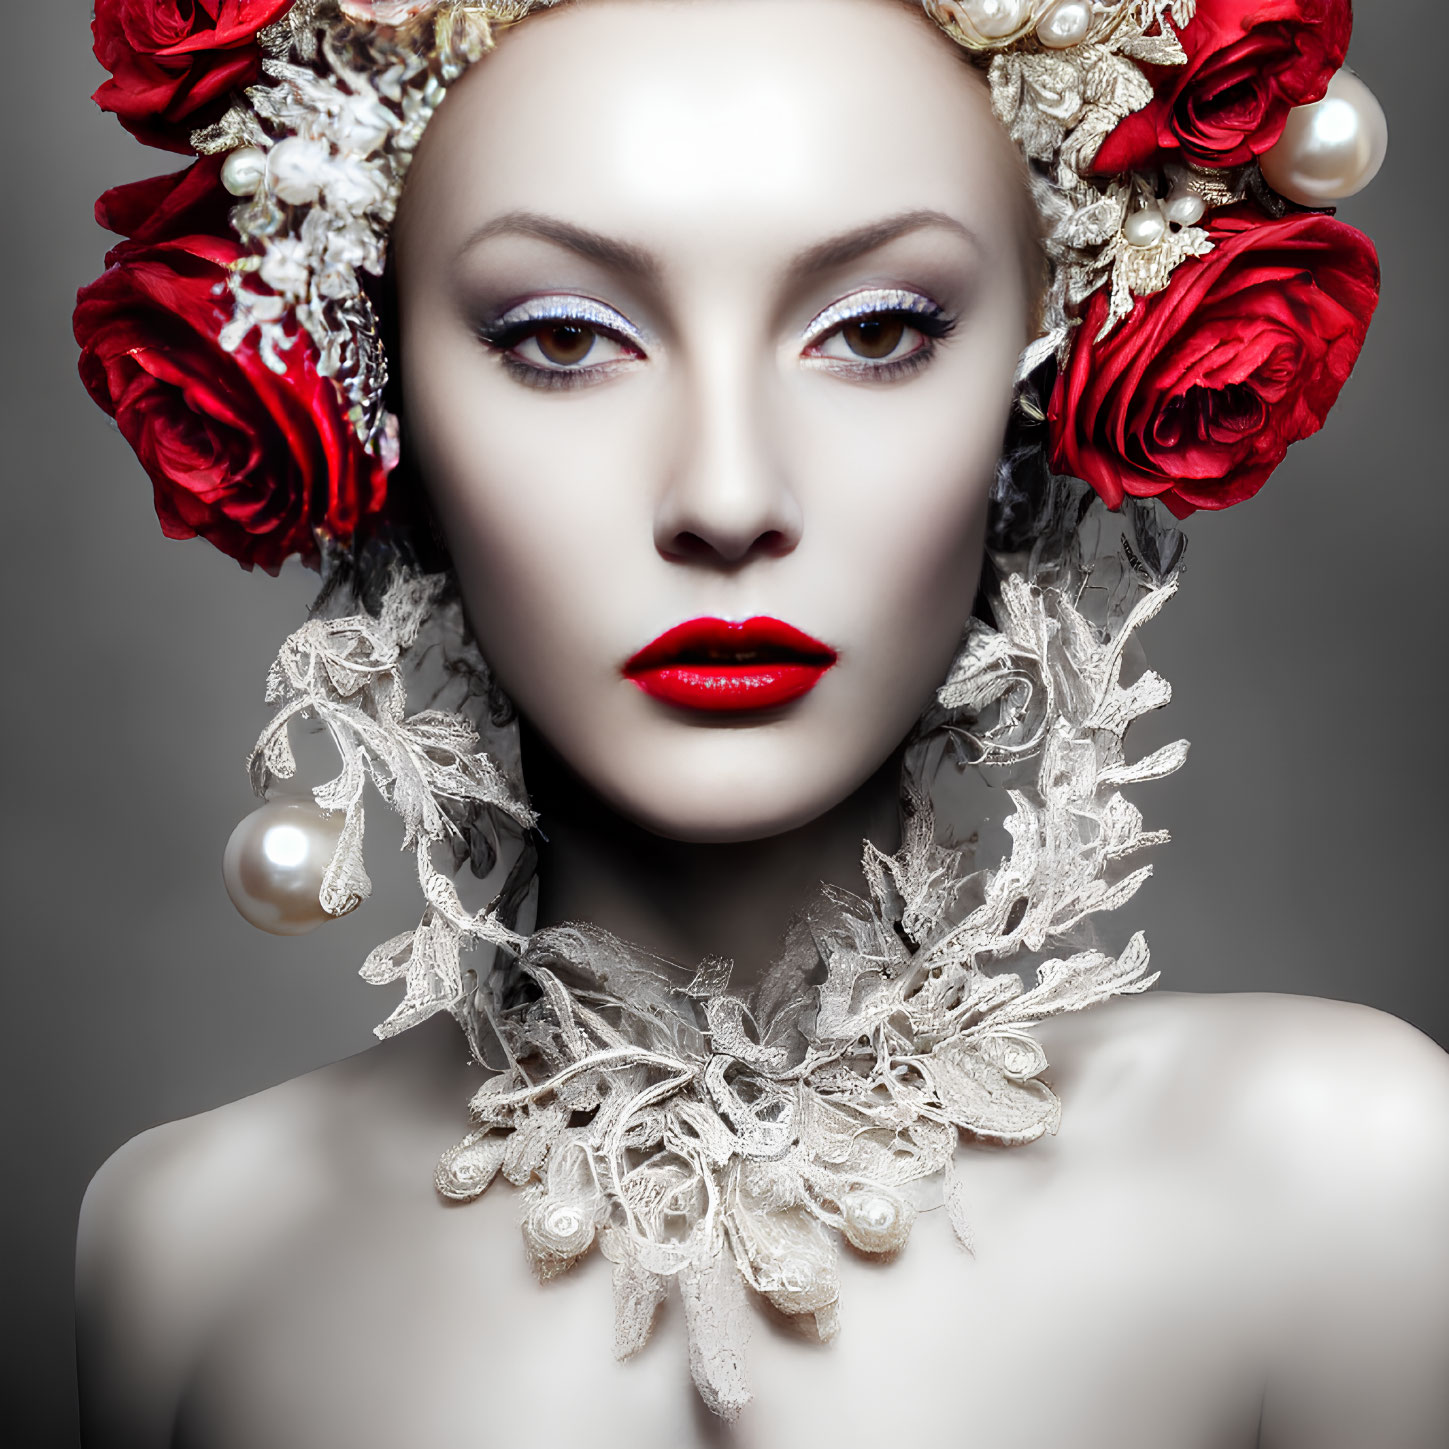 Portrait of a Woman with Red Lips and Floral Headpiece